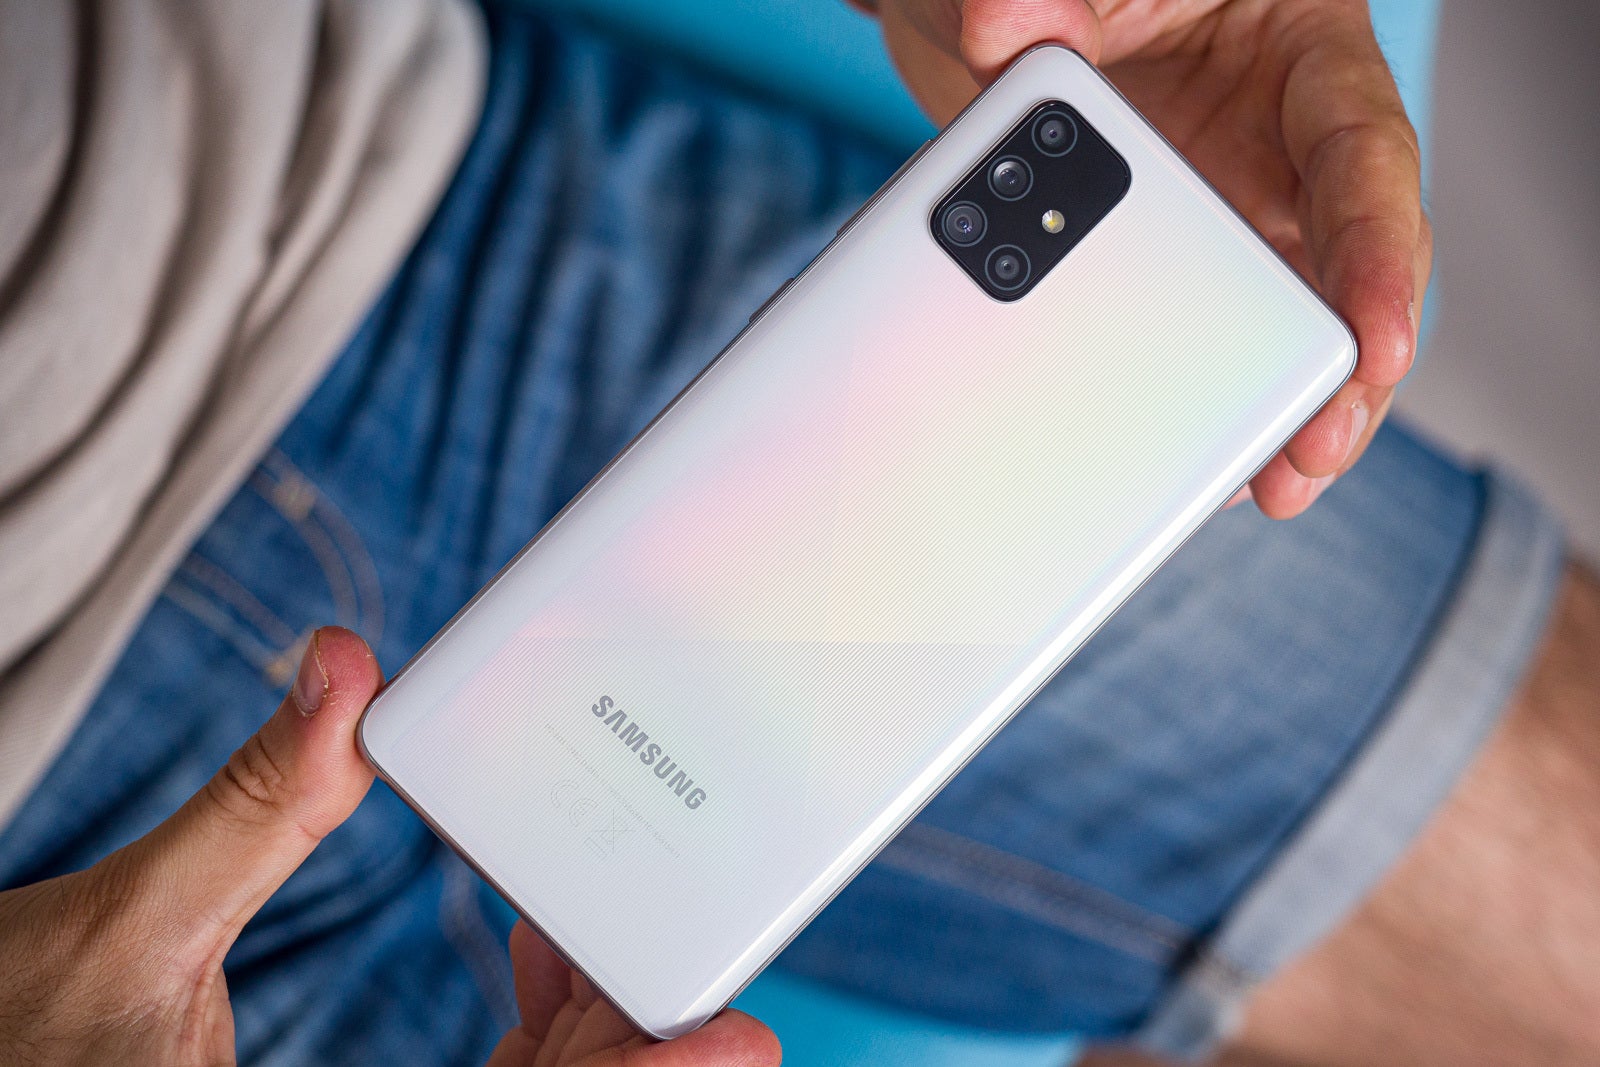 You can save up to $400 right now on the Galaxy A71 5G (AT&amp;T) at Best Buy